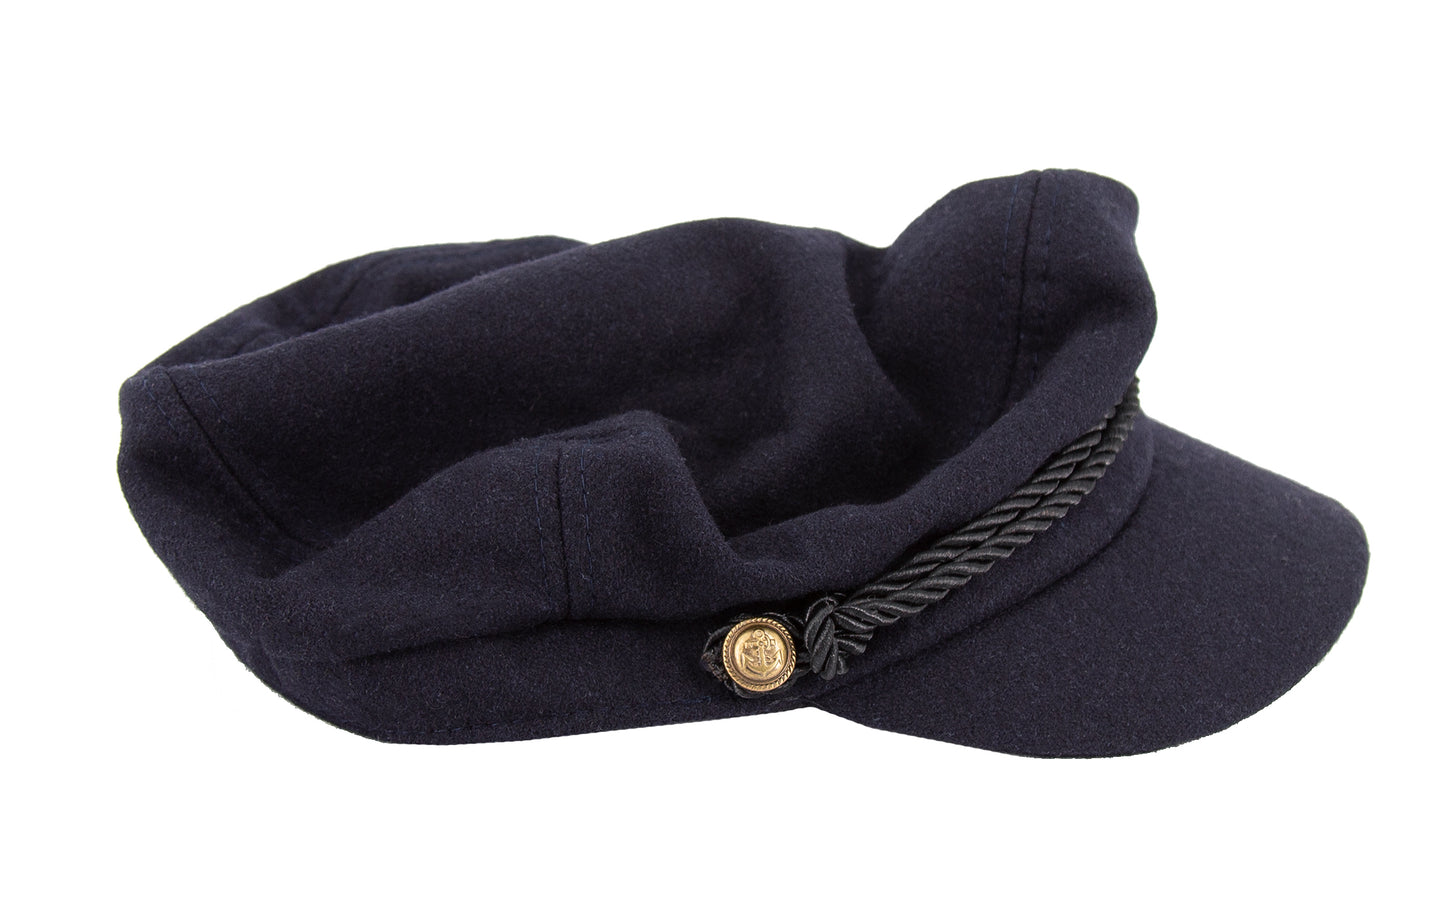 Form-stable outdoor felt hat, suitable for the weather with a wide clamp-high UV protection for women and men